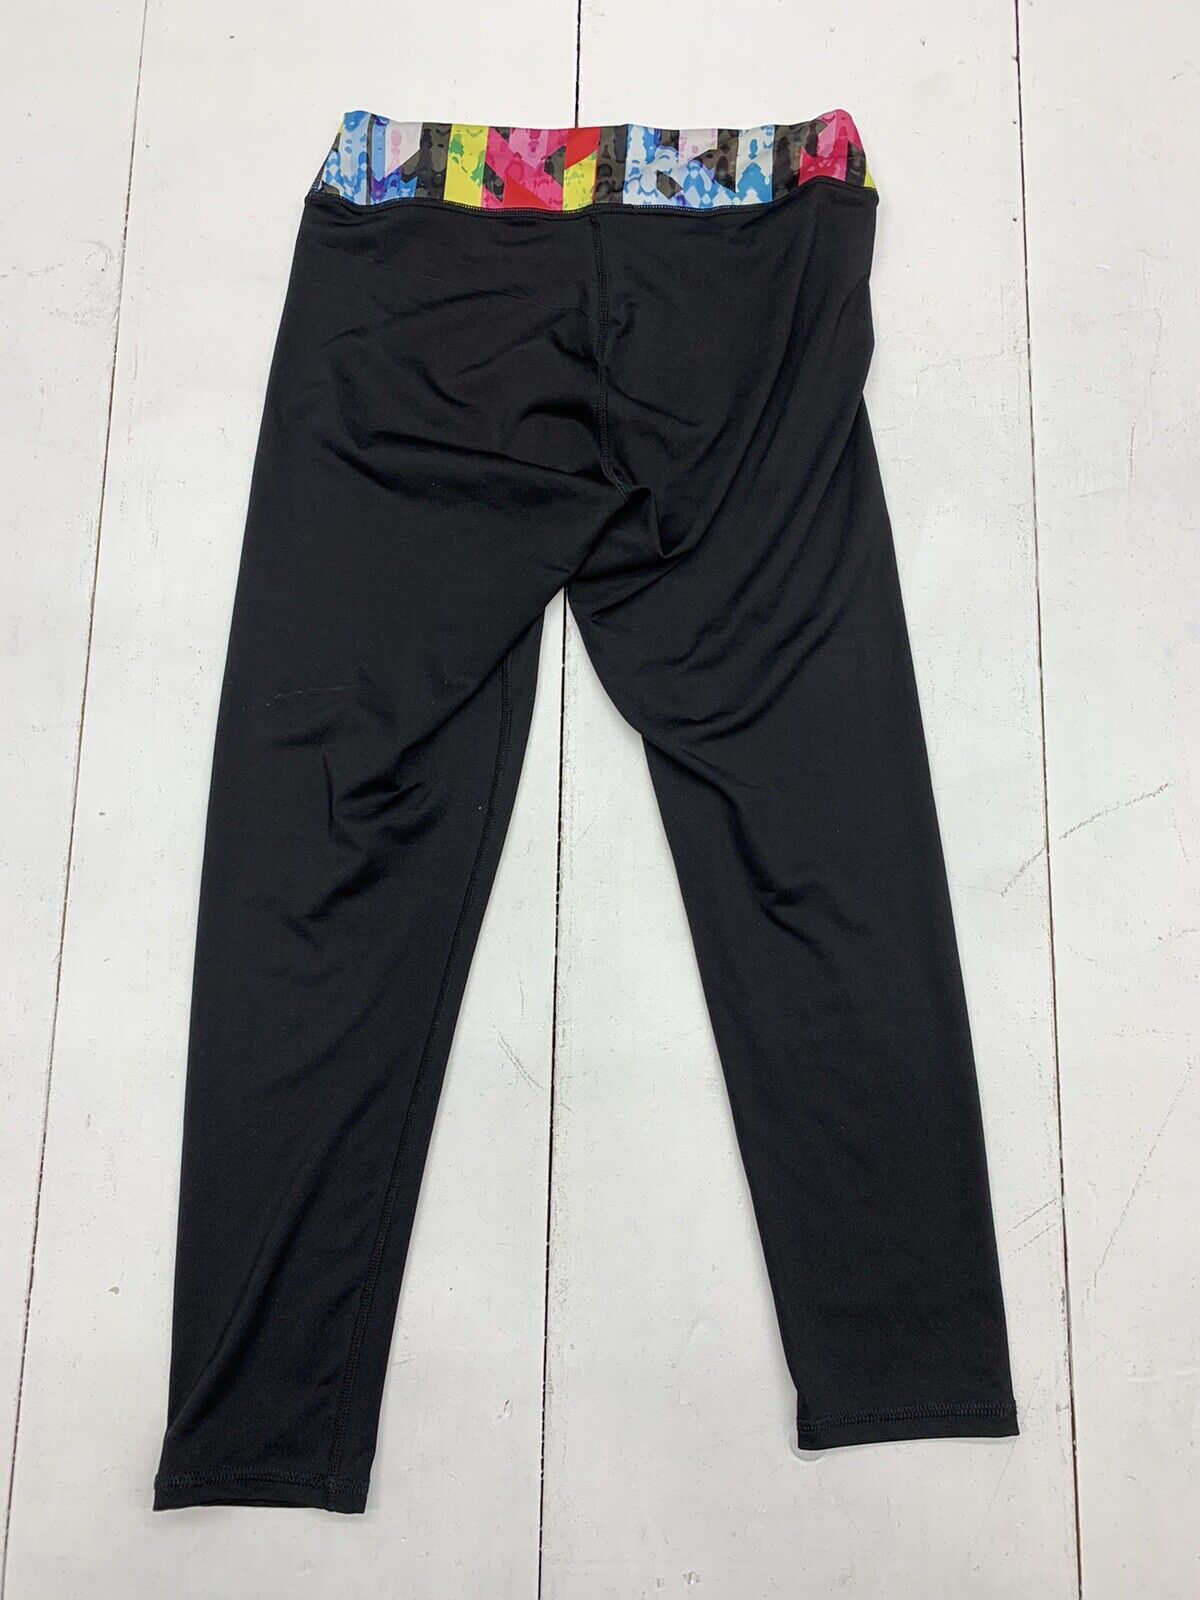 Delicia Womens Black Athletic Leggings Size Large - beyond exchange